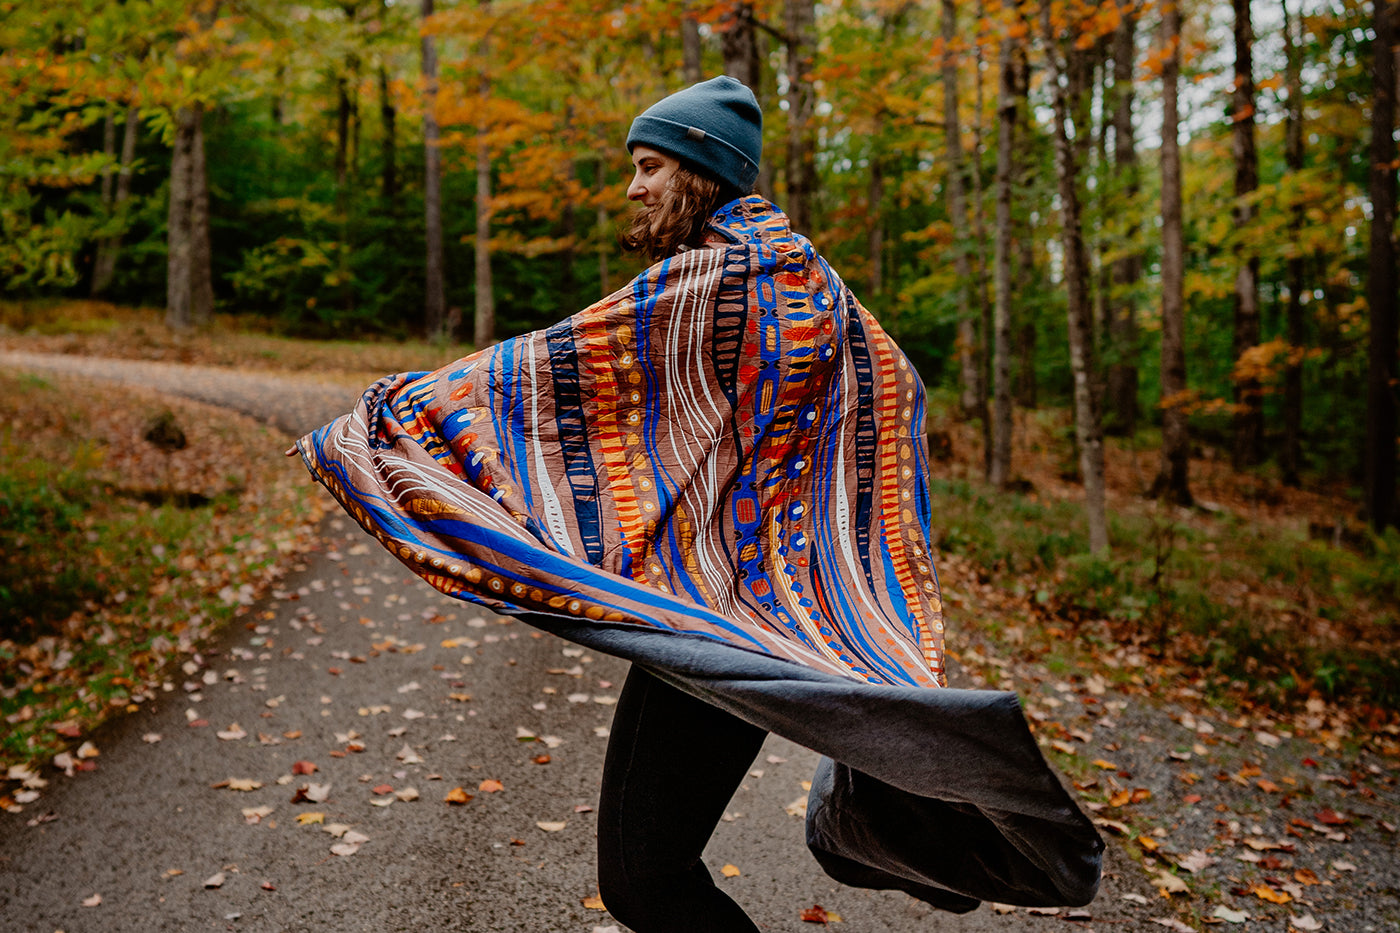 A woman spins while wearing the FieldDay Blanket surrounded by fall foliage.